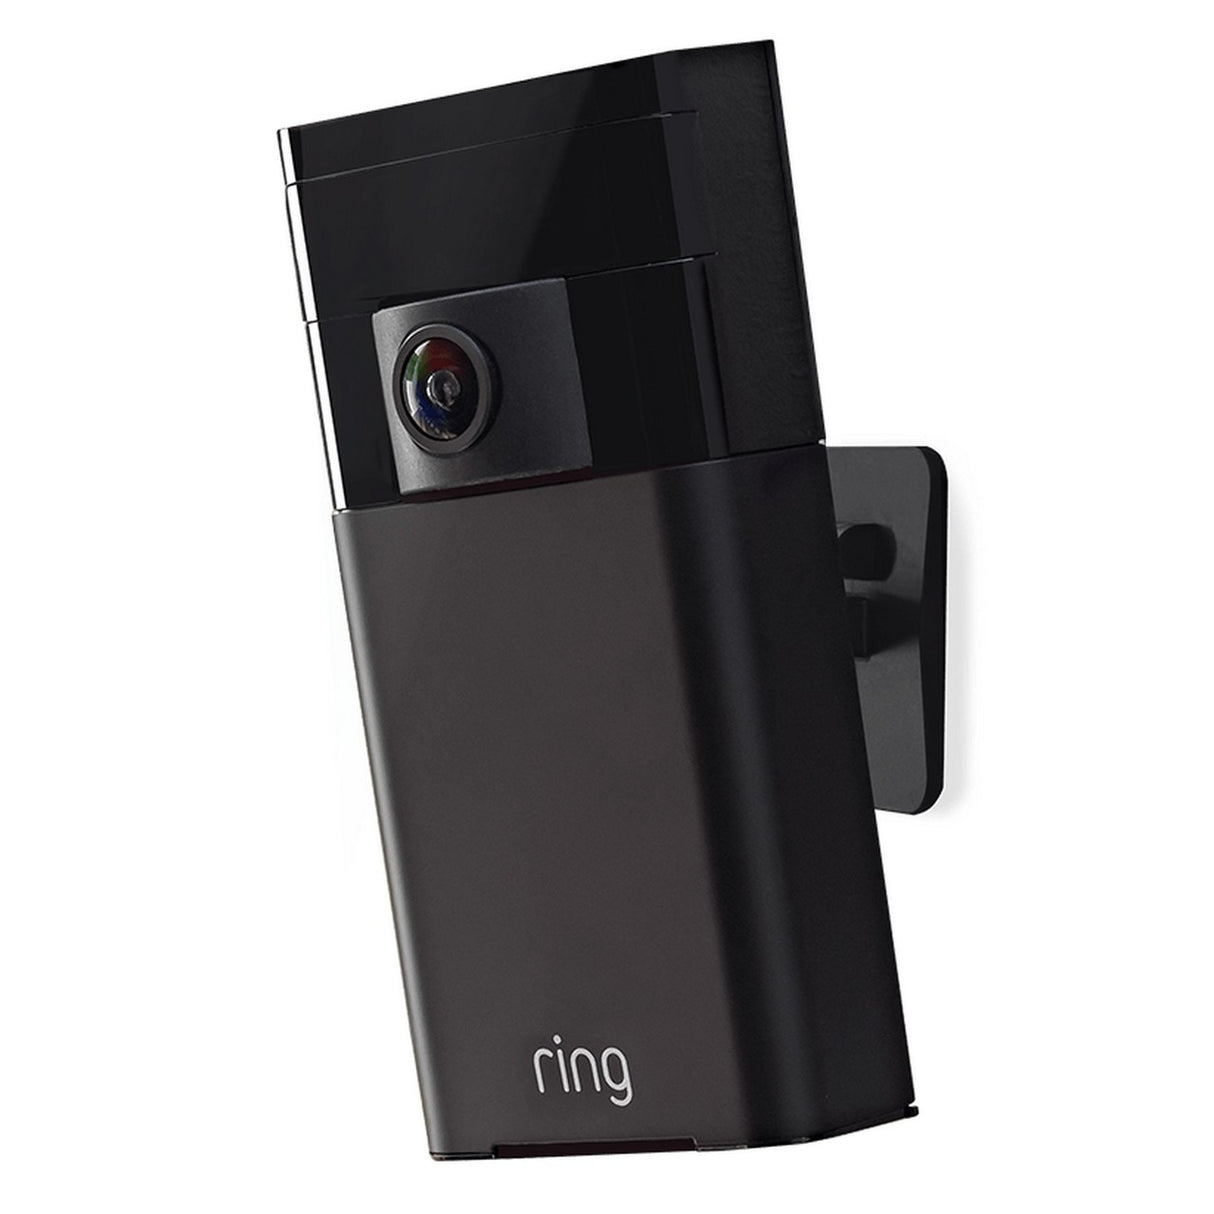 Ring Stick Up Cam | Weather Resistant Wire Free HD Security Camera